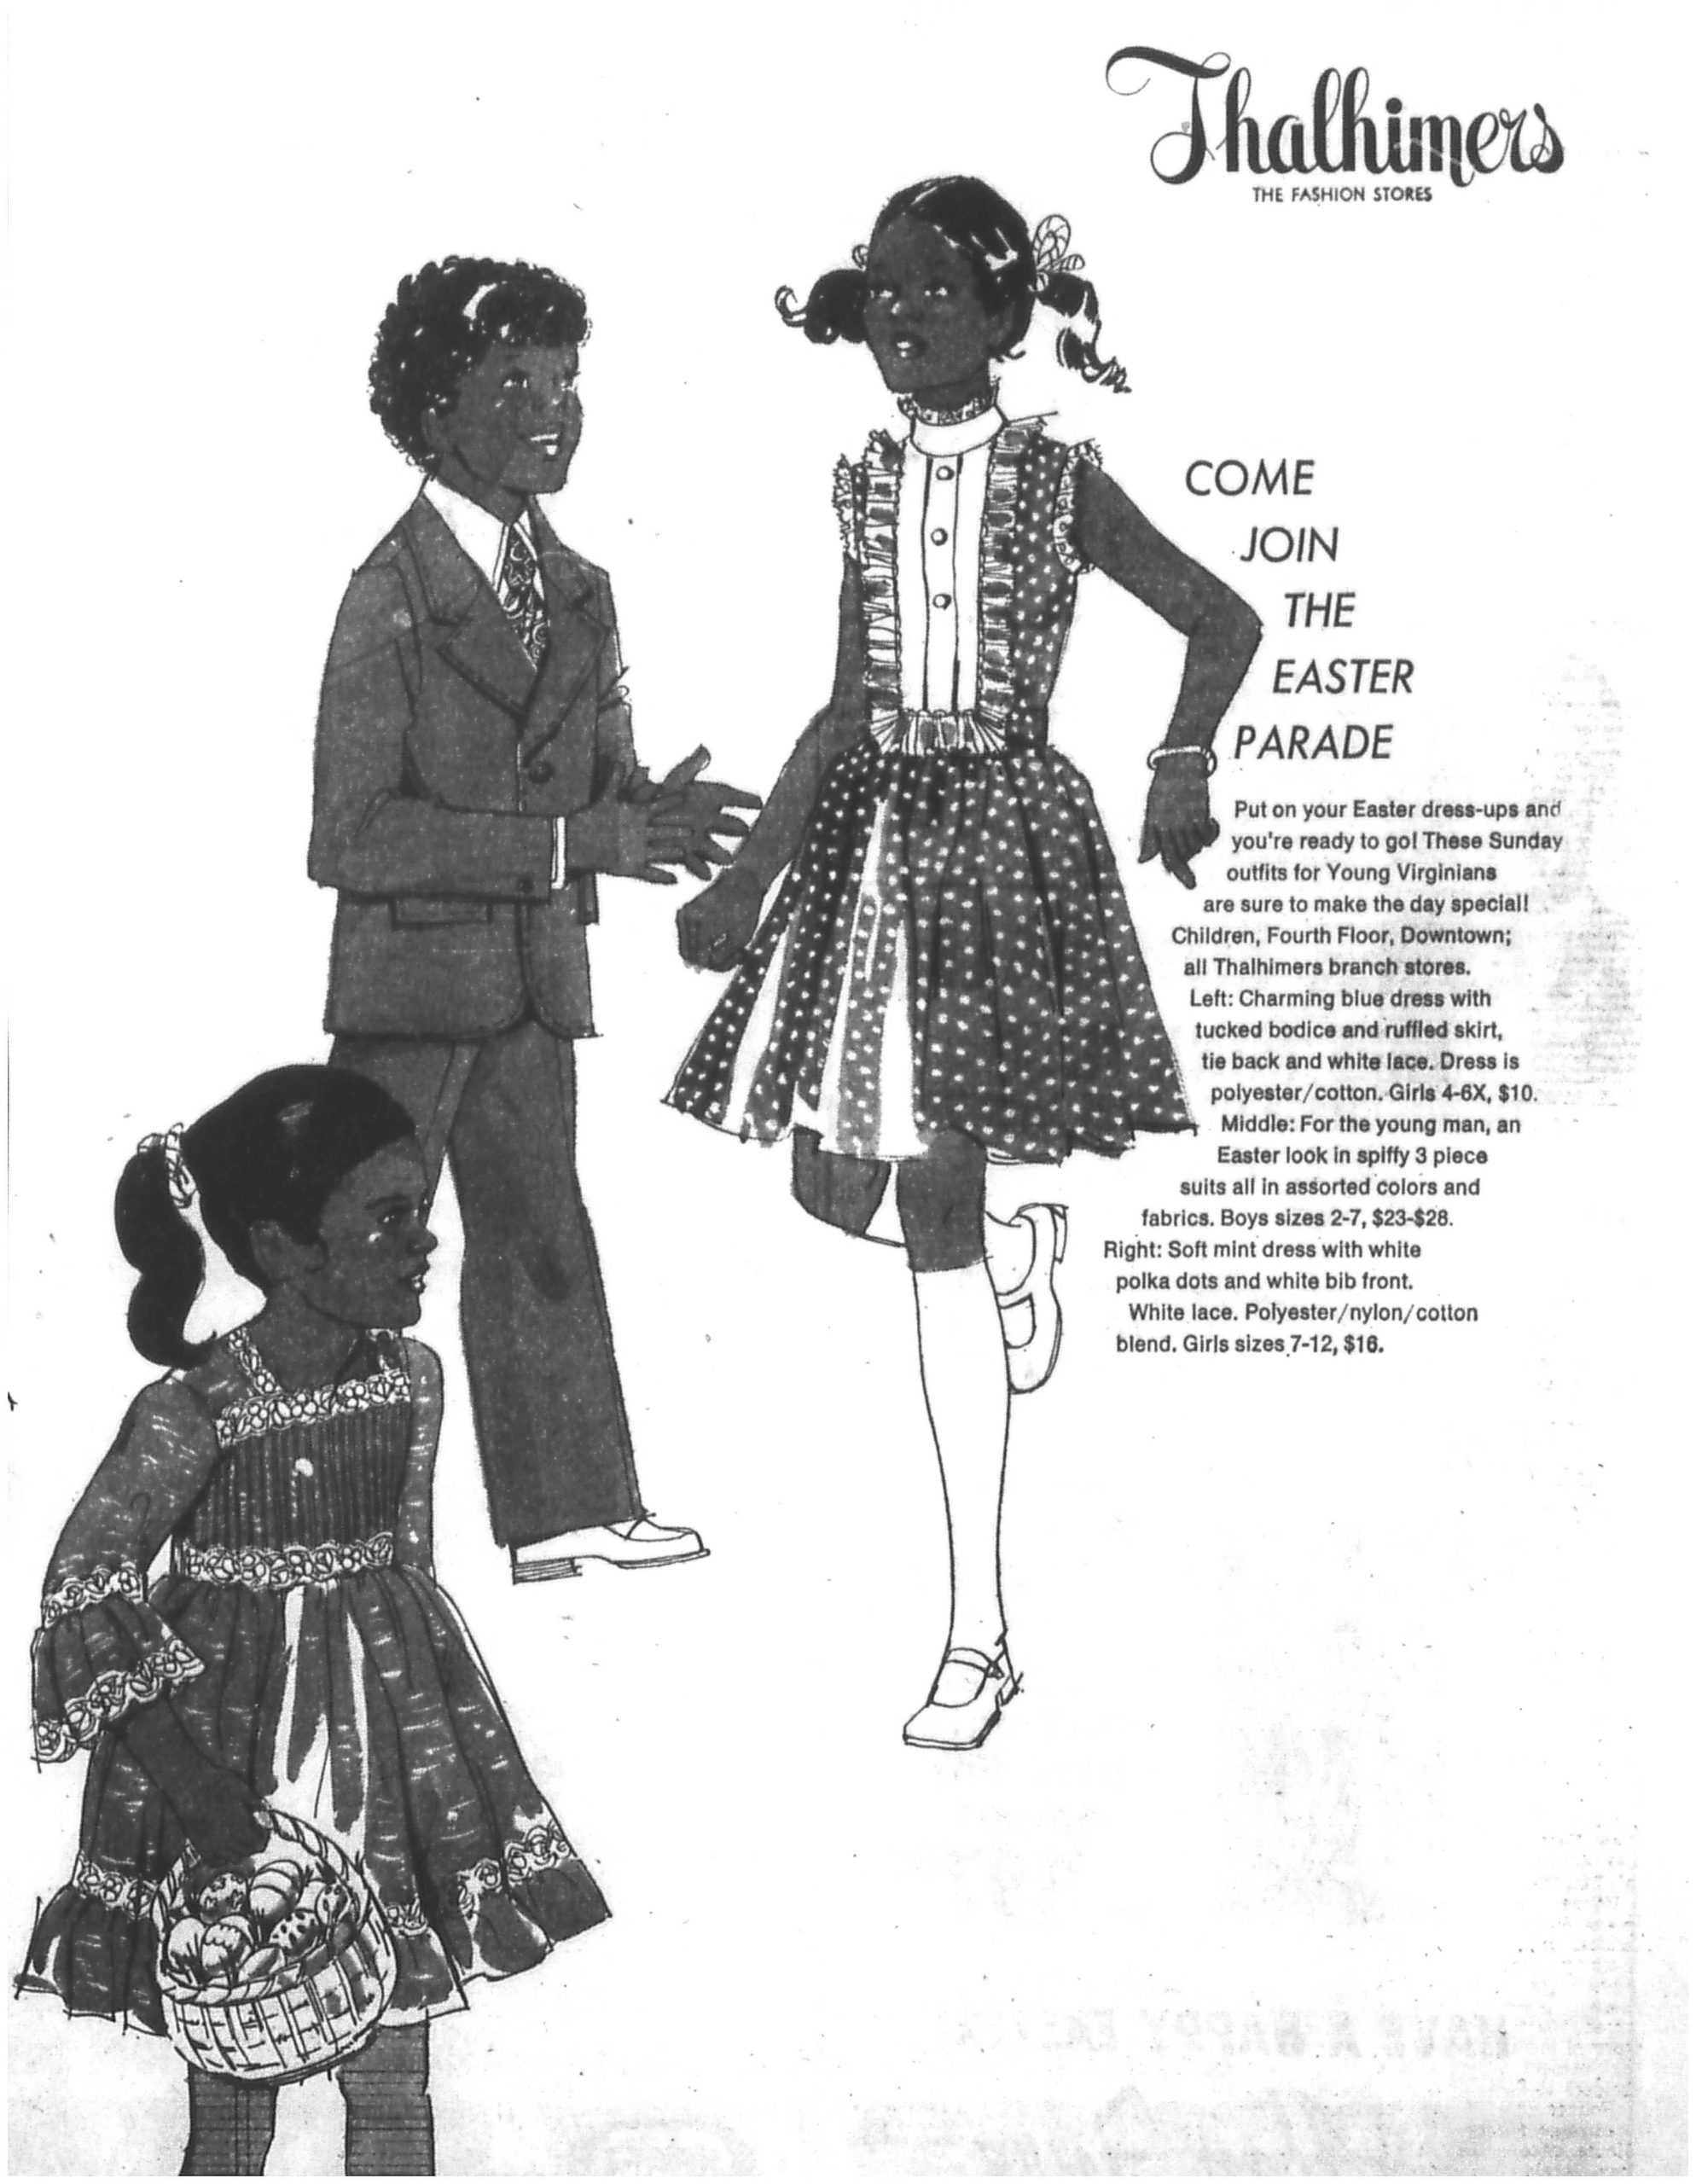 No Sham Sales! Fashion Ads in Newspapers Over the Years